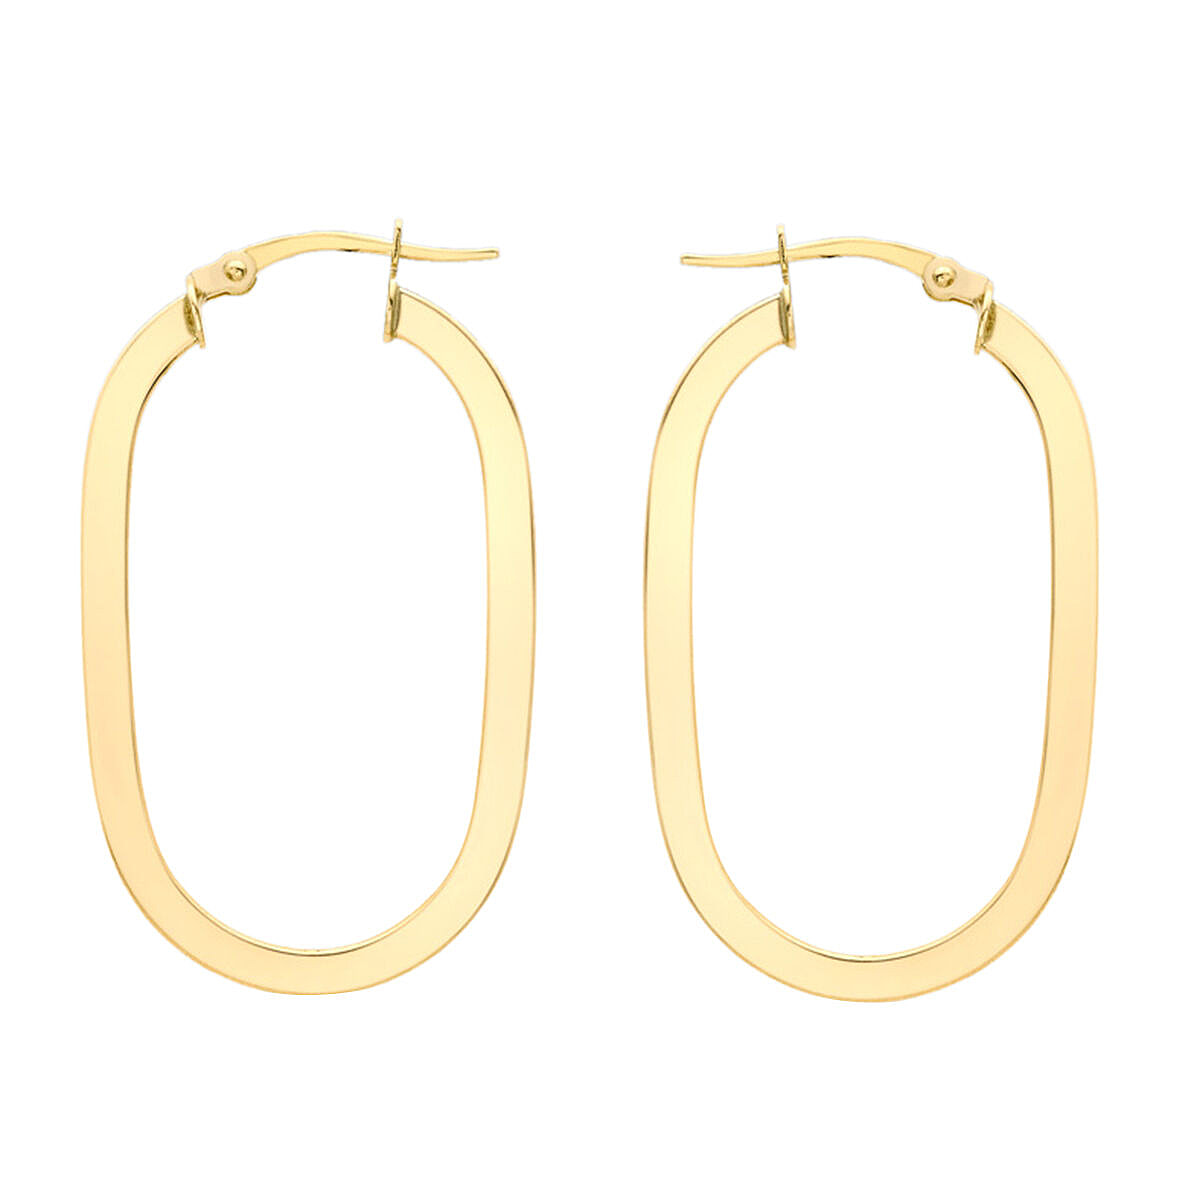 Vicenza Closeout - 9K Yellow Gold Large Oval Hoop Earrings